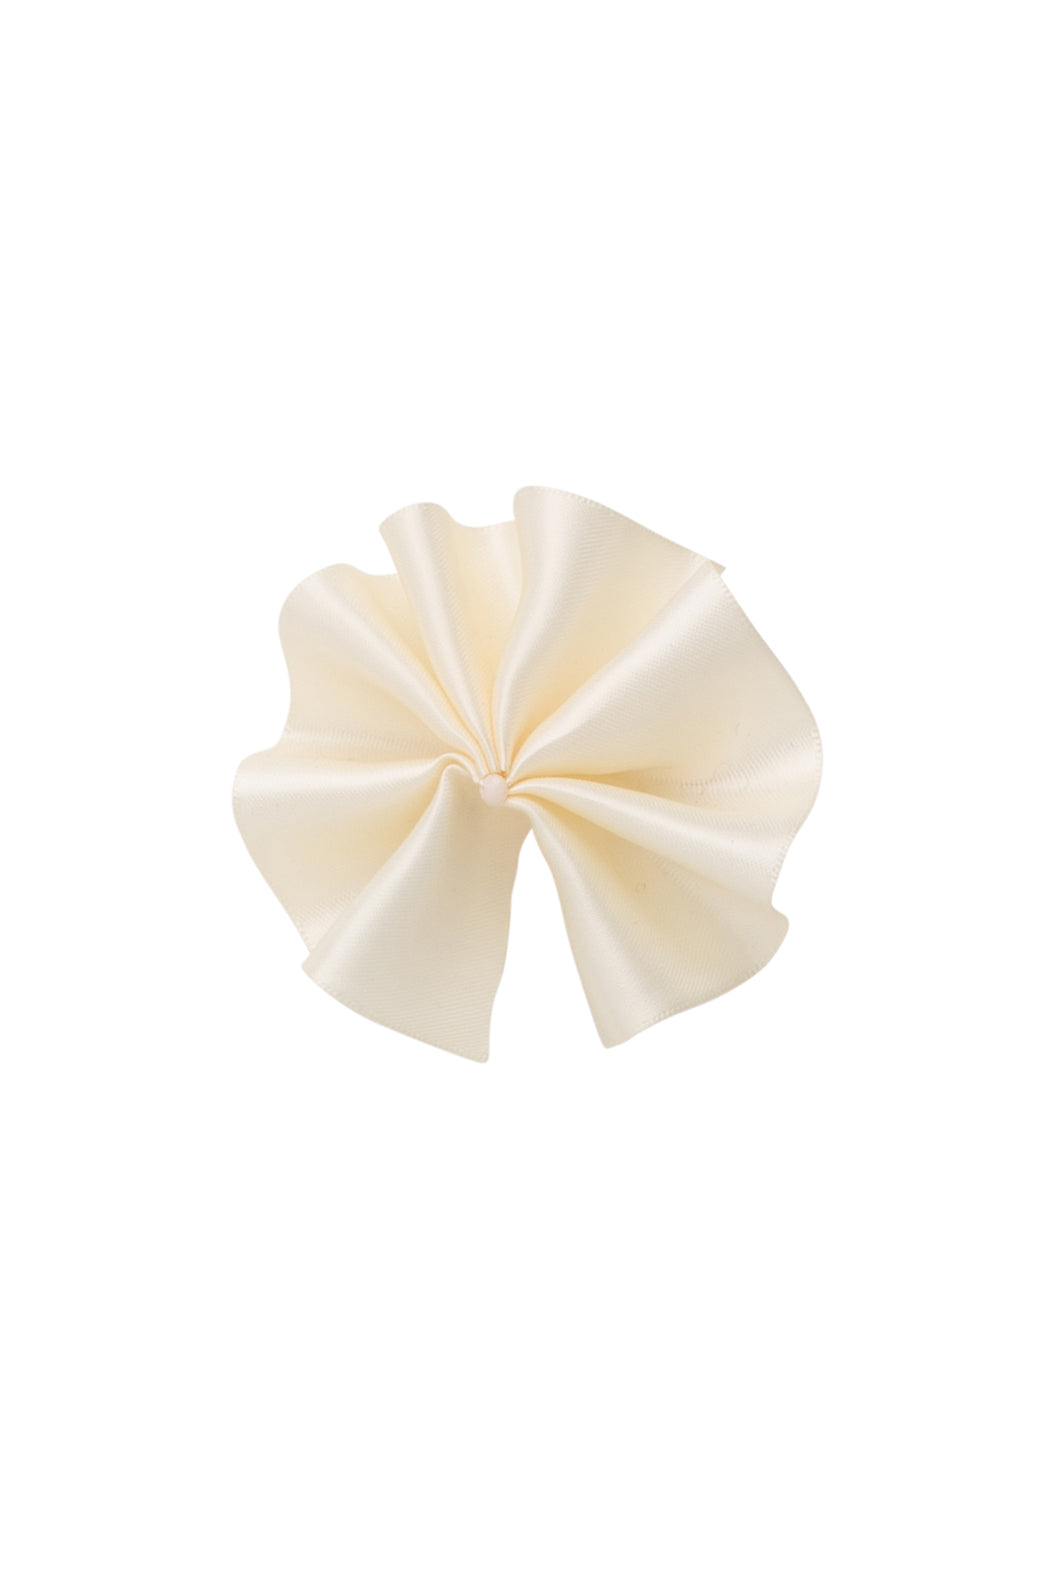 Pirouette Clip (1 pc) - Ivory